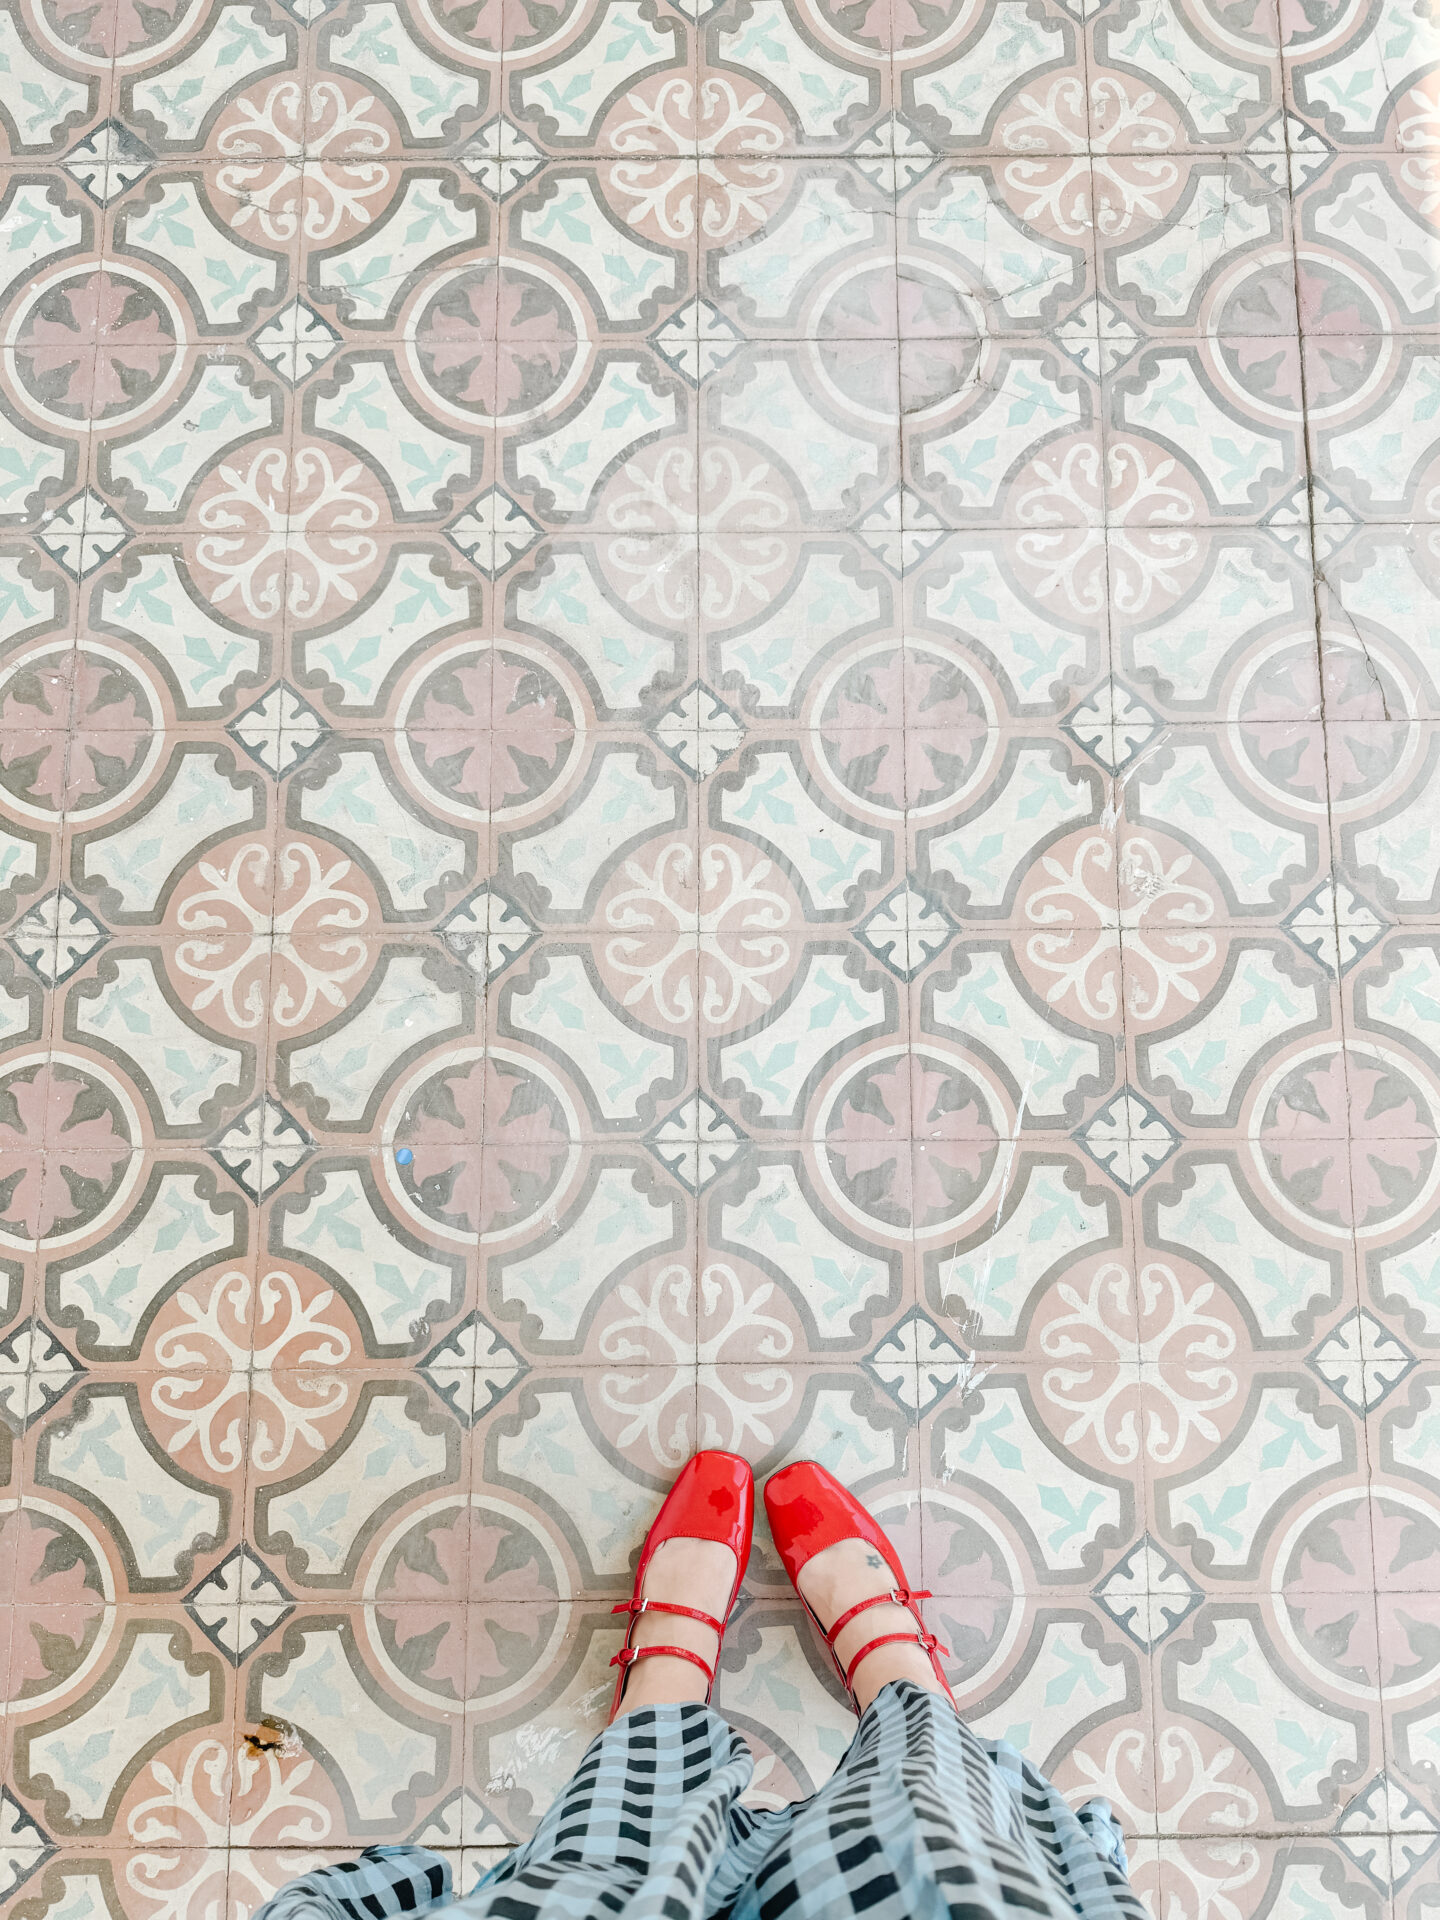 blue and beige tiles with red tiles